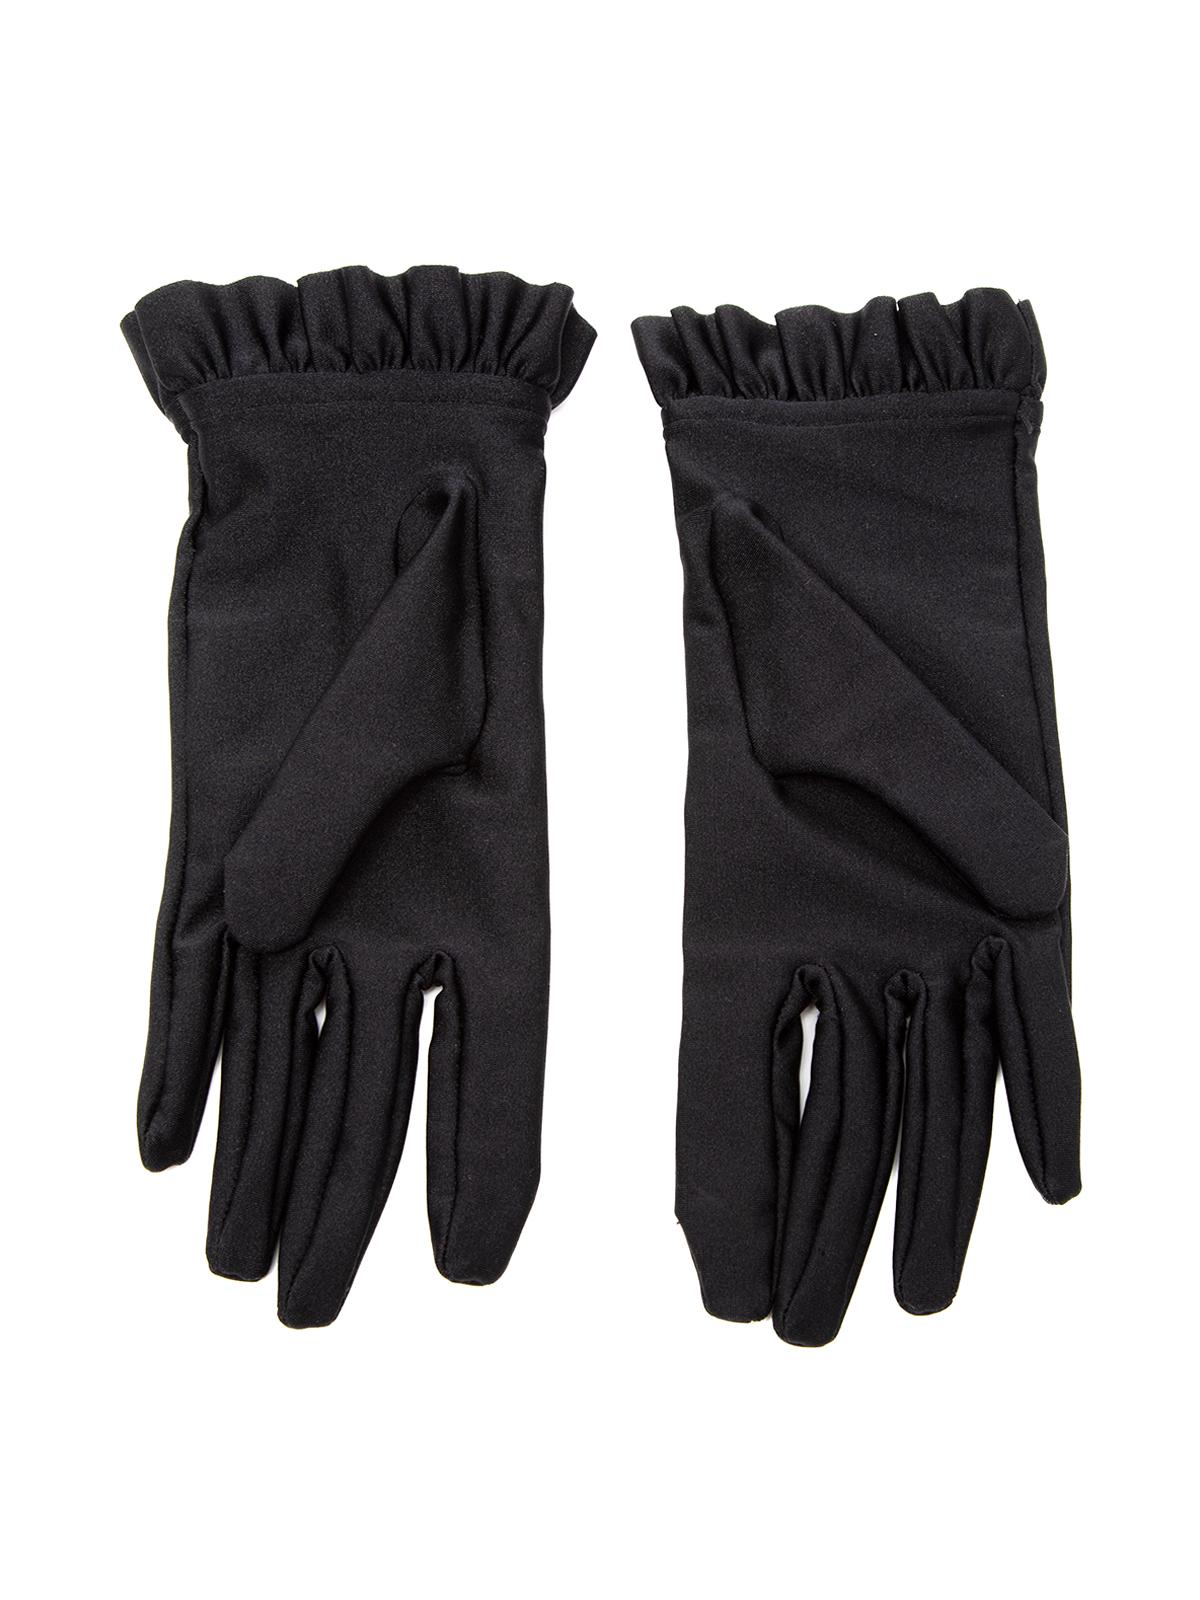 CONDITION is Very good. No wear to gloves is evident on this used Balenciaga designer resale item. Details Black Nylon Ruffled edges on gloves Wrist gloves Made in Italy Composition EXTERIOR:Nylon INTERIOR:Nylon Size & Fit Product measurements: